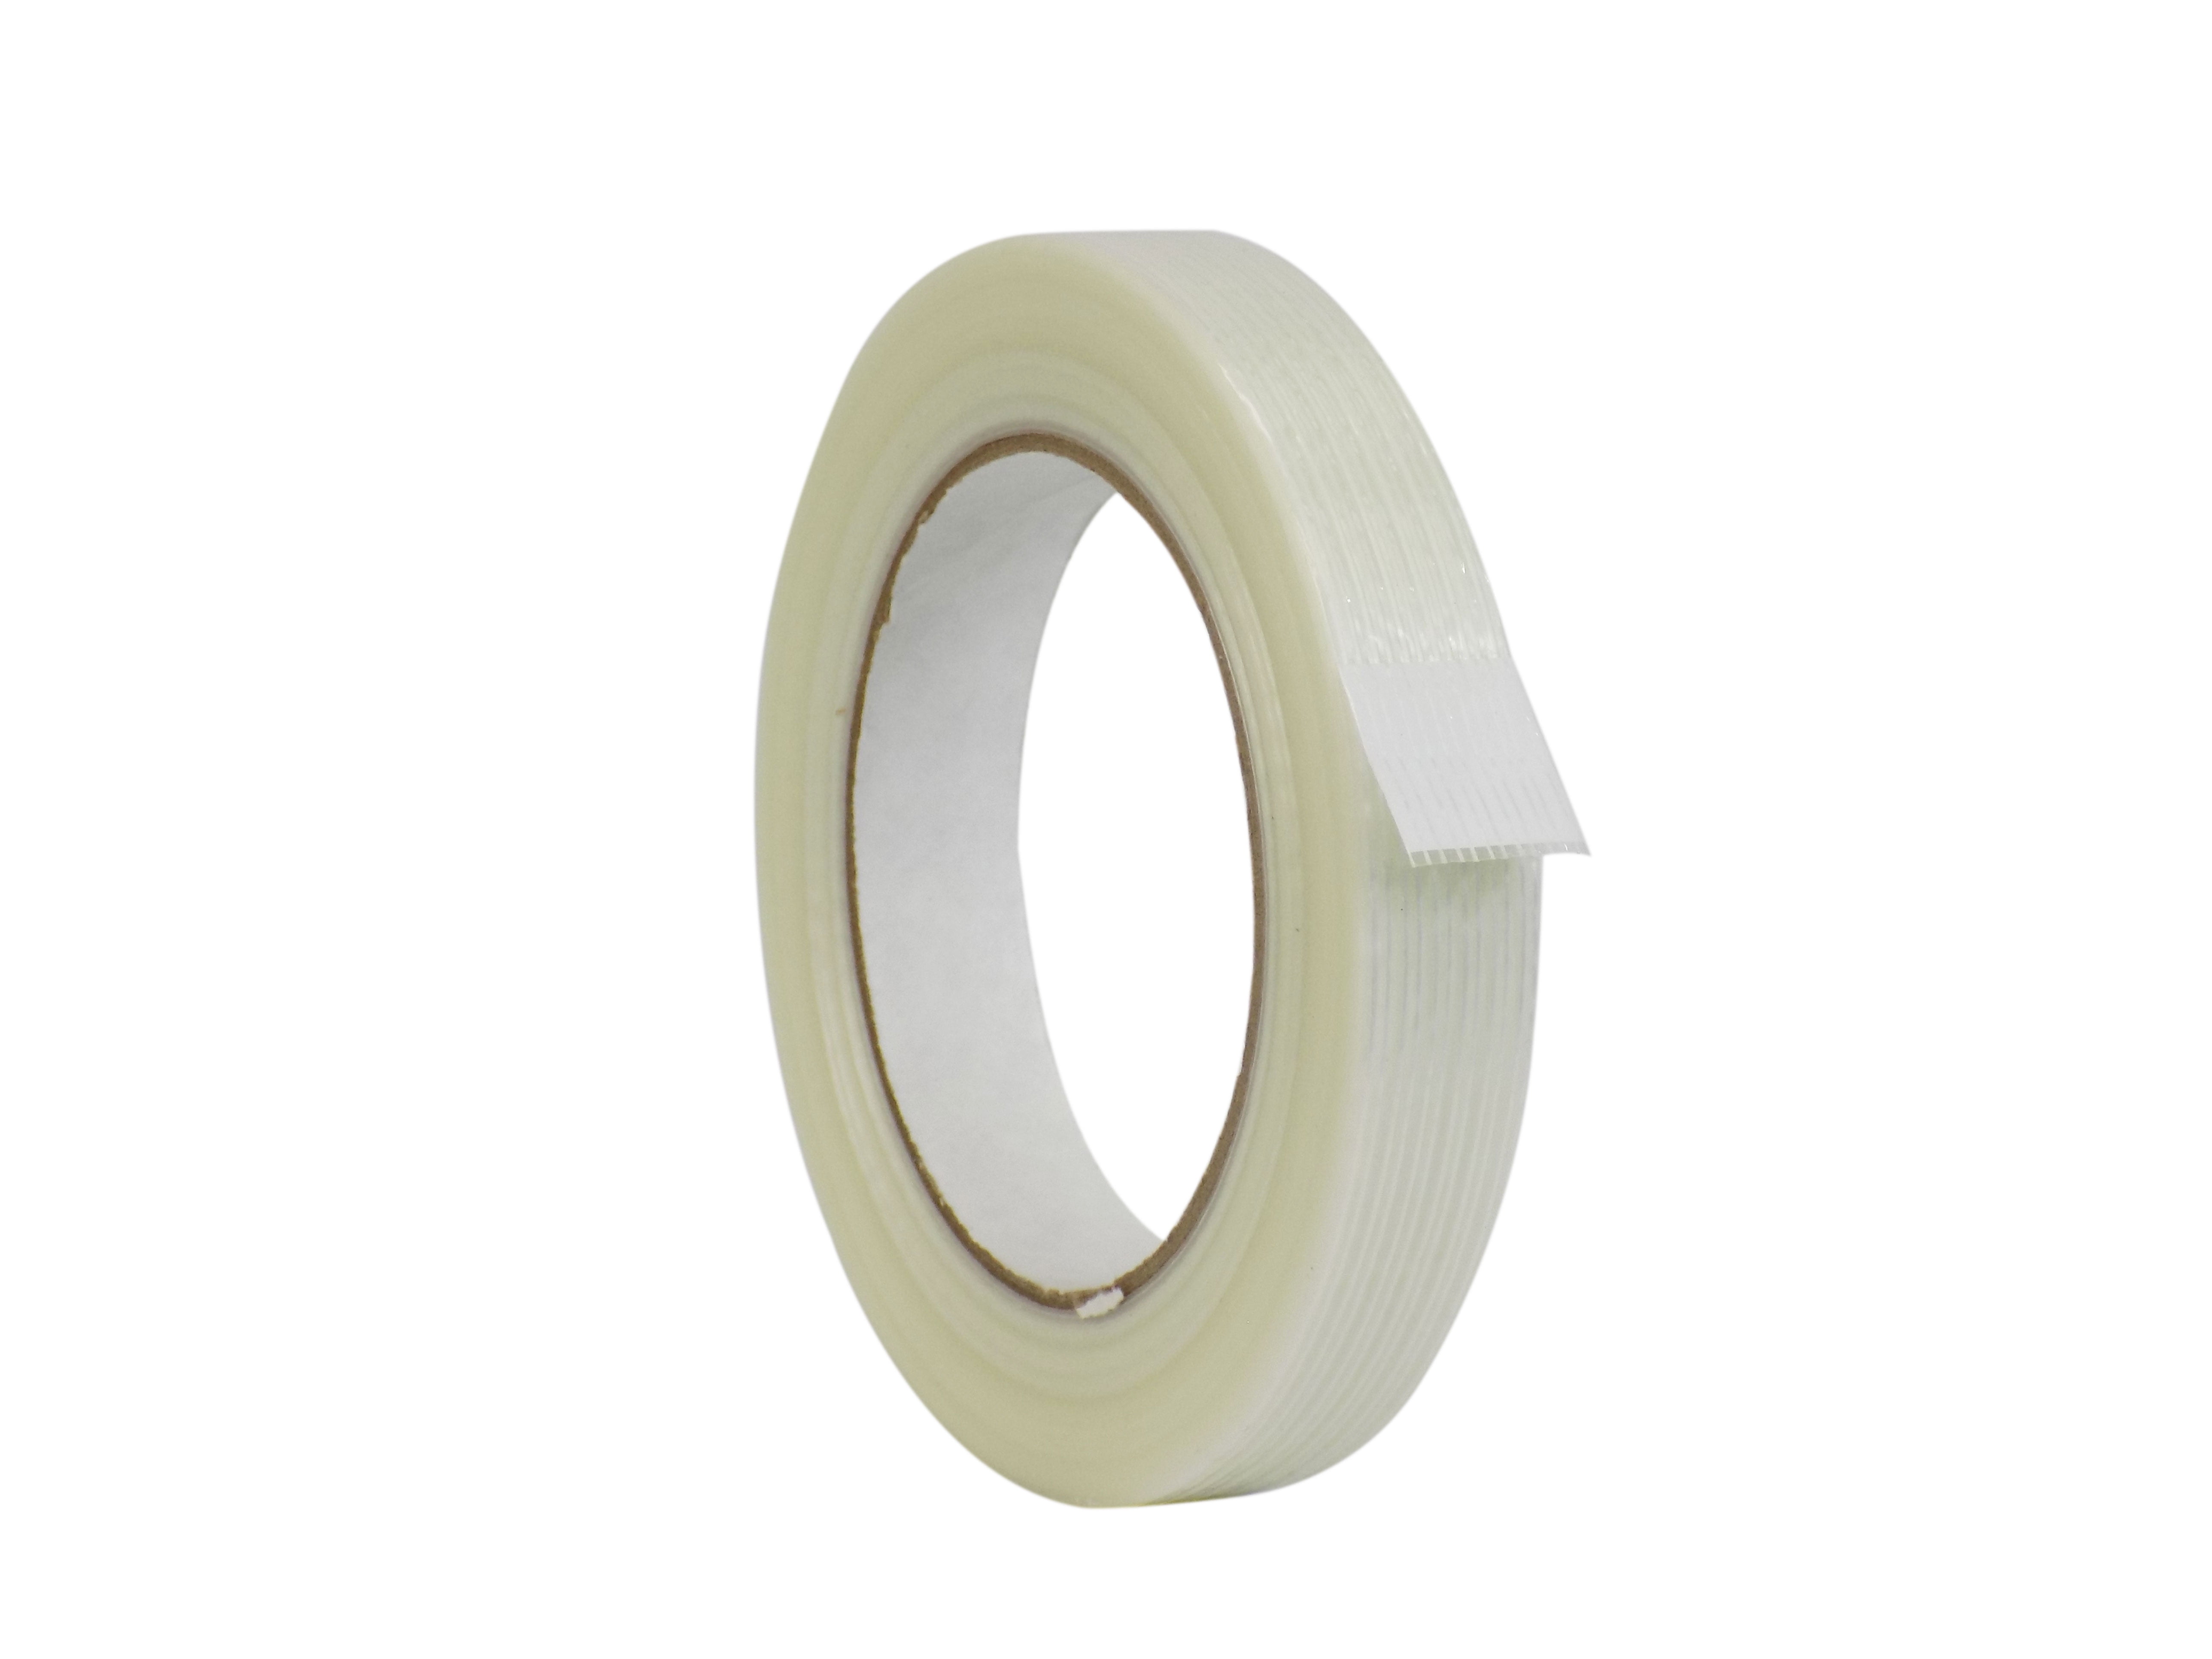 Pack of 4 3 inch Wide x 60 yds. Filaments Run Lengthwise MAT Commodity Grade Fiberglass Reinforced Filament Strapping Tape 